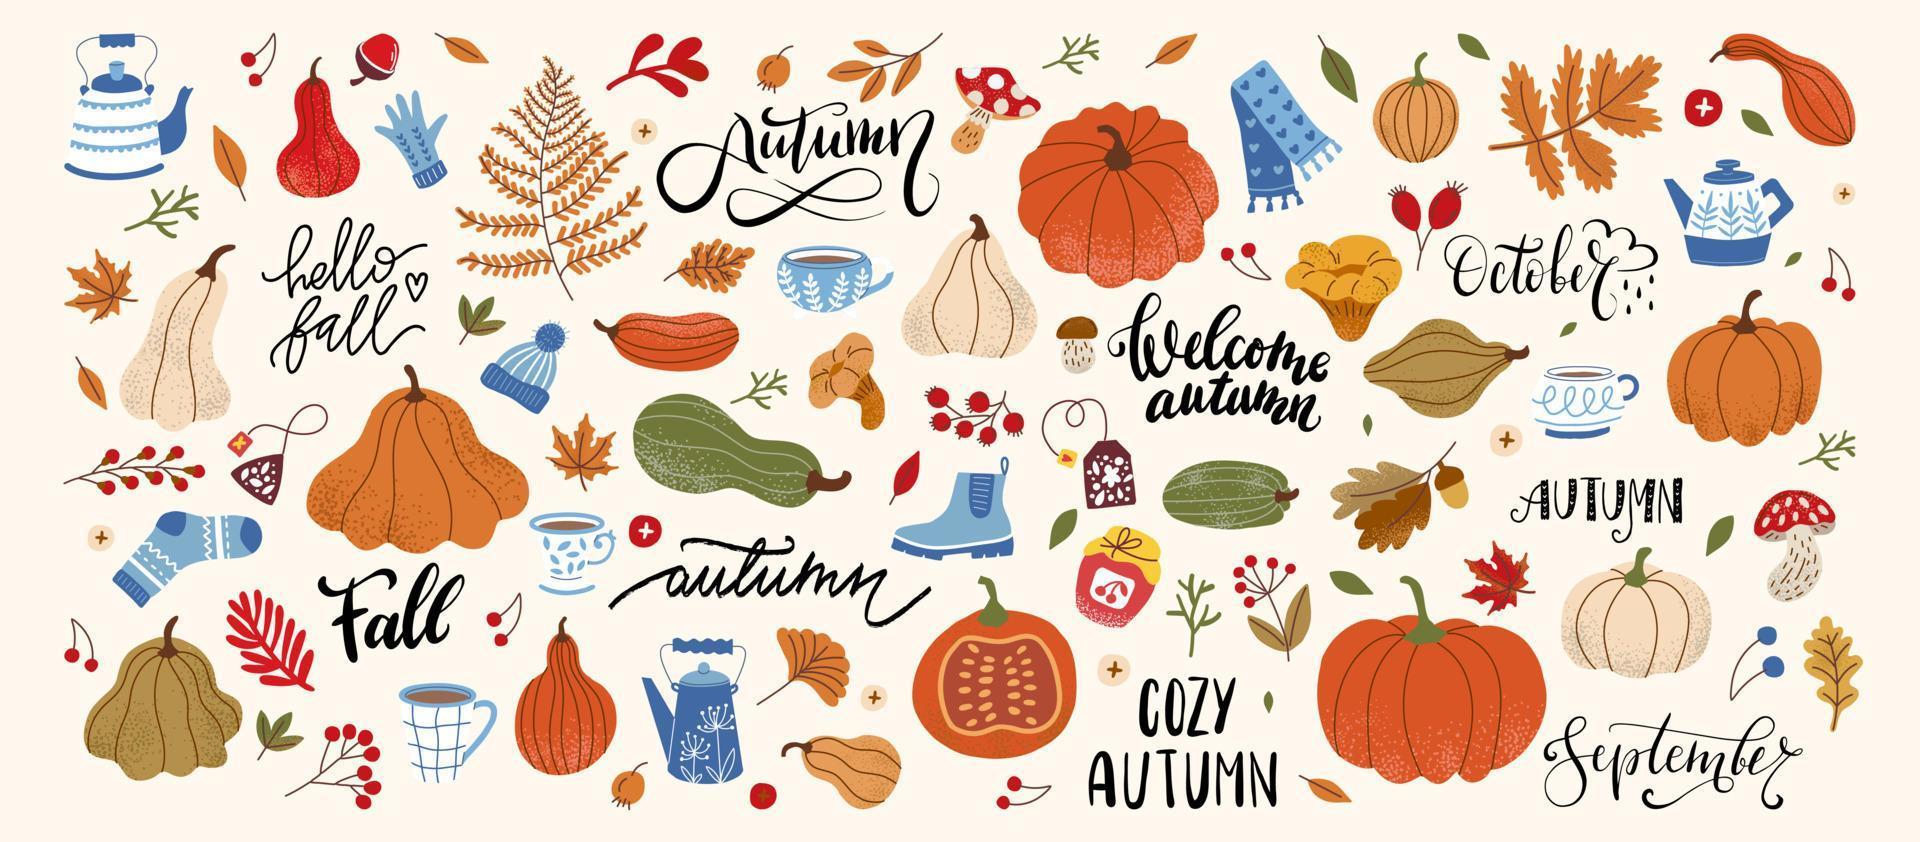 A large set with autumn oral leaves, pumpkin, sweater, tea and gloves. Leaf Fall, Mug, Pumpkin, Squash and Lettering Fall vector